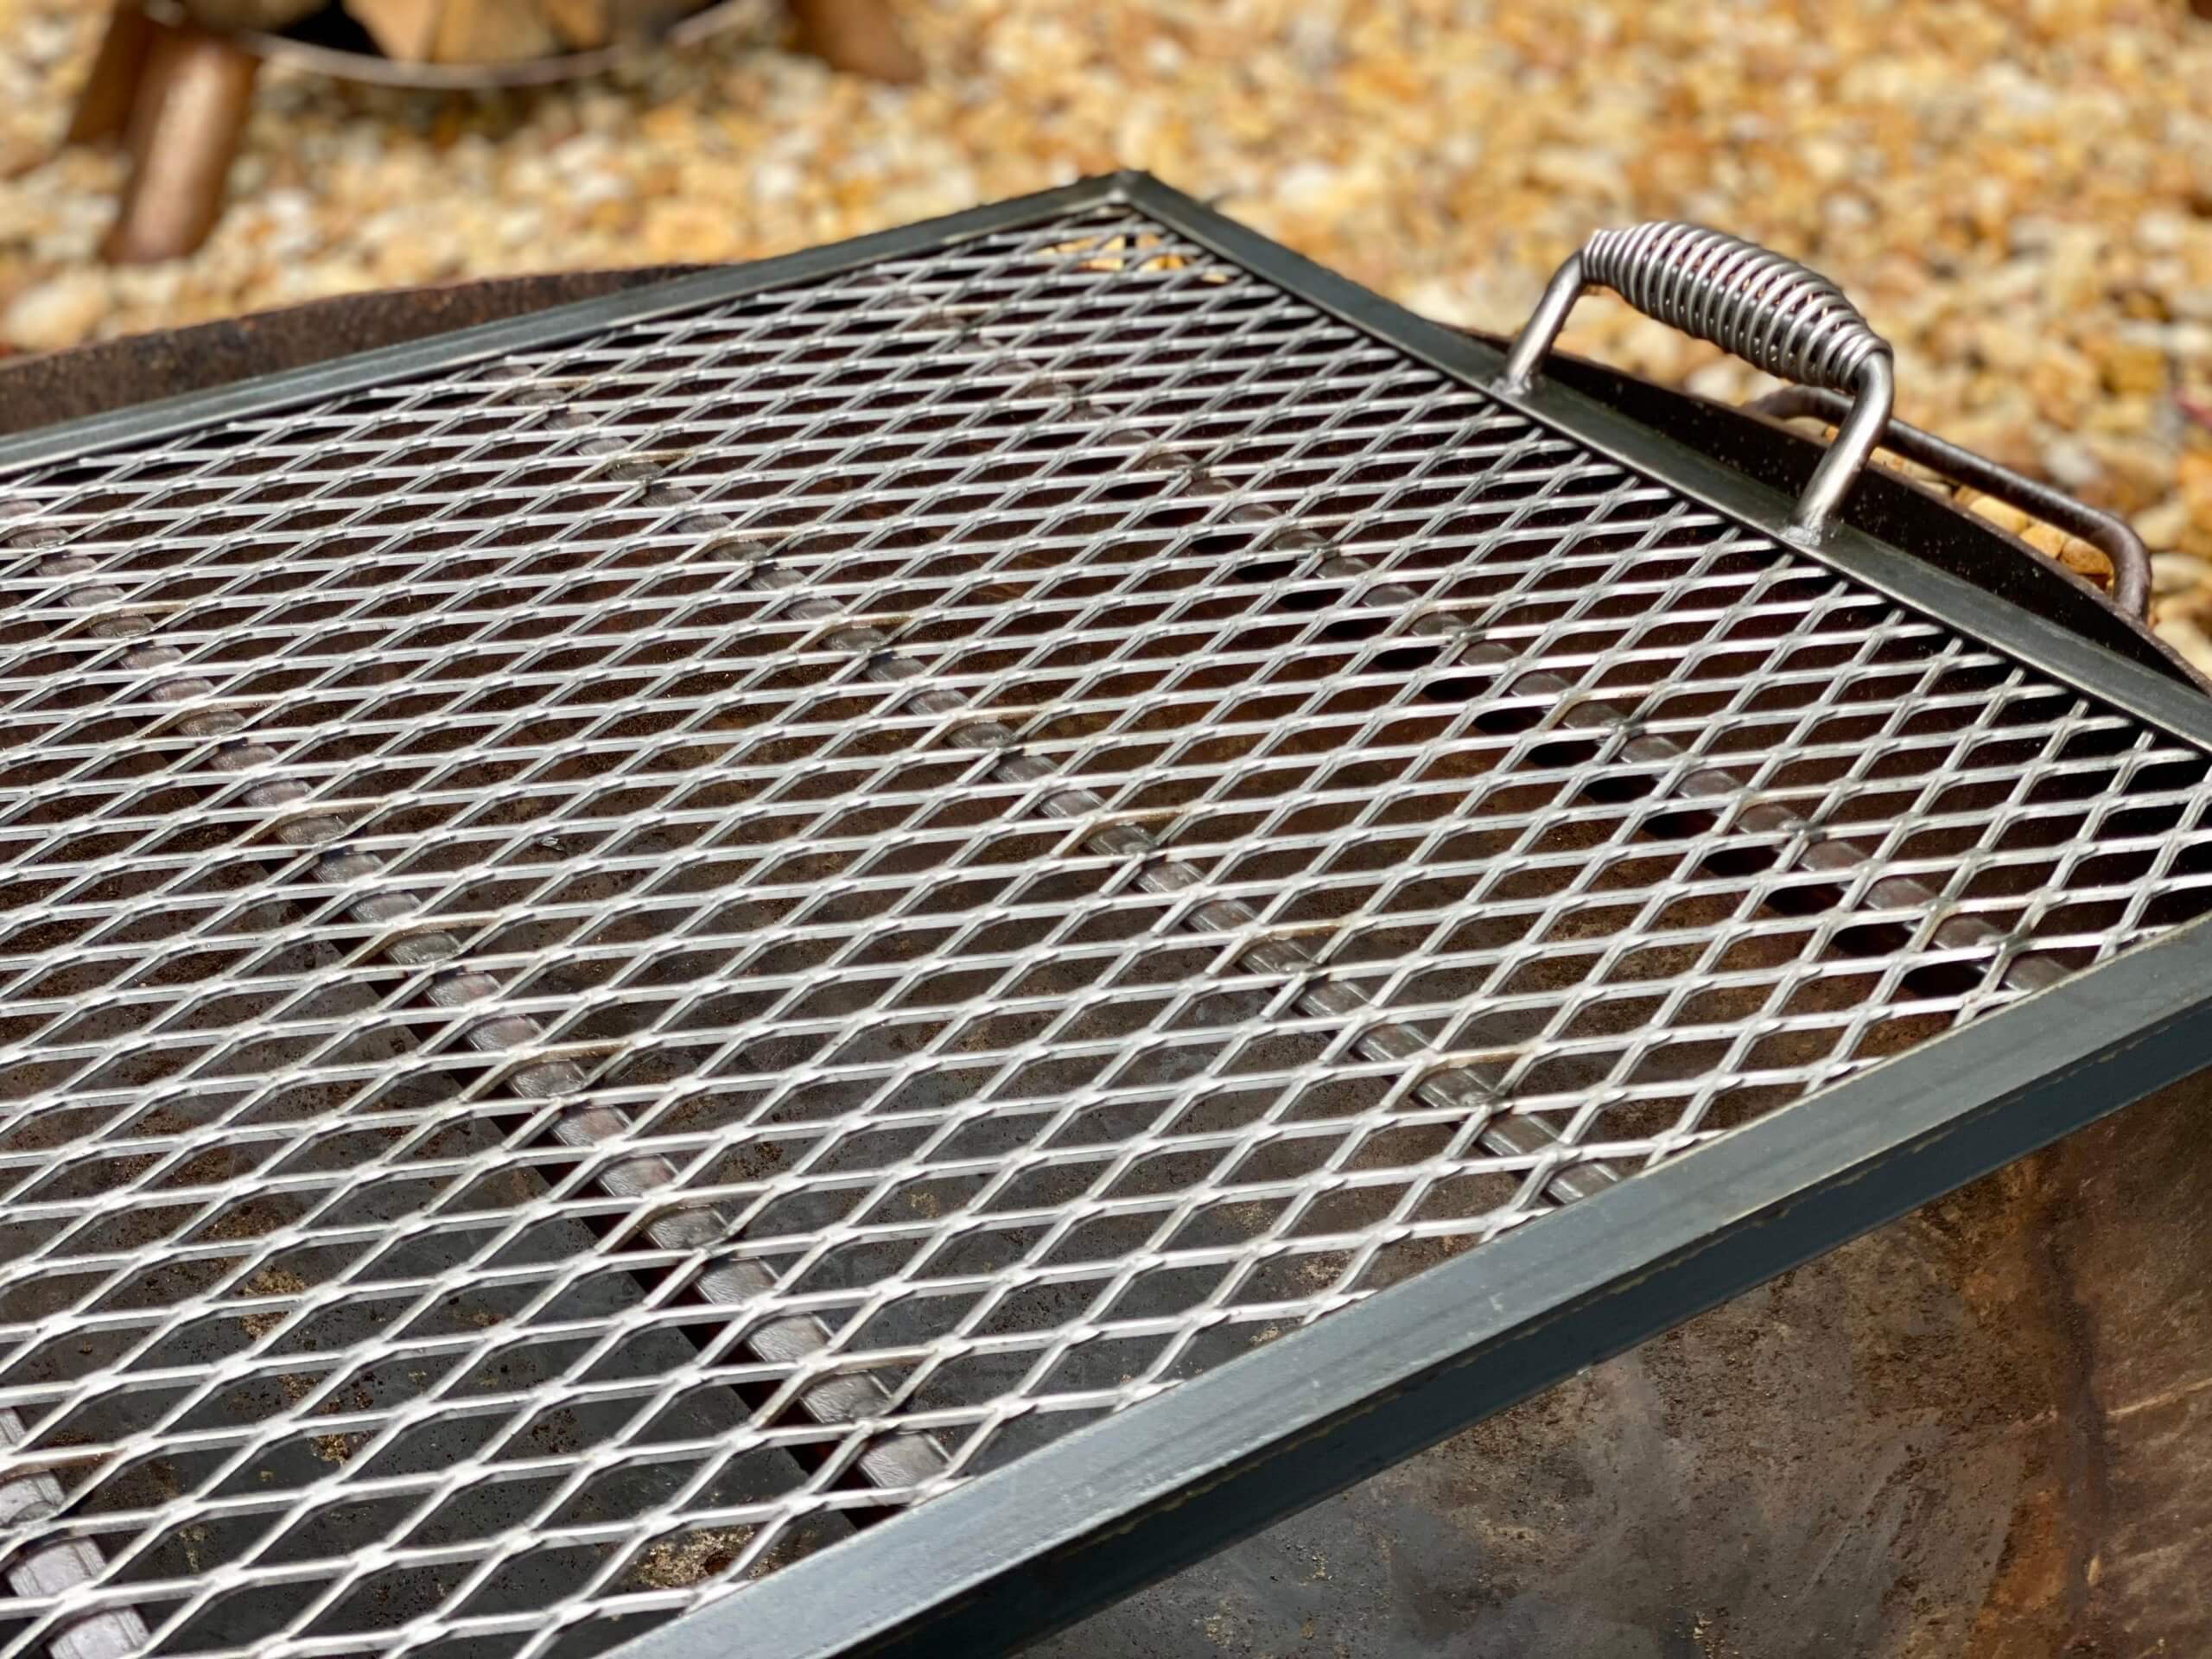 Fire Pit Cooking Grate, 36 Inch Round Fire Pit Grate